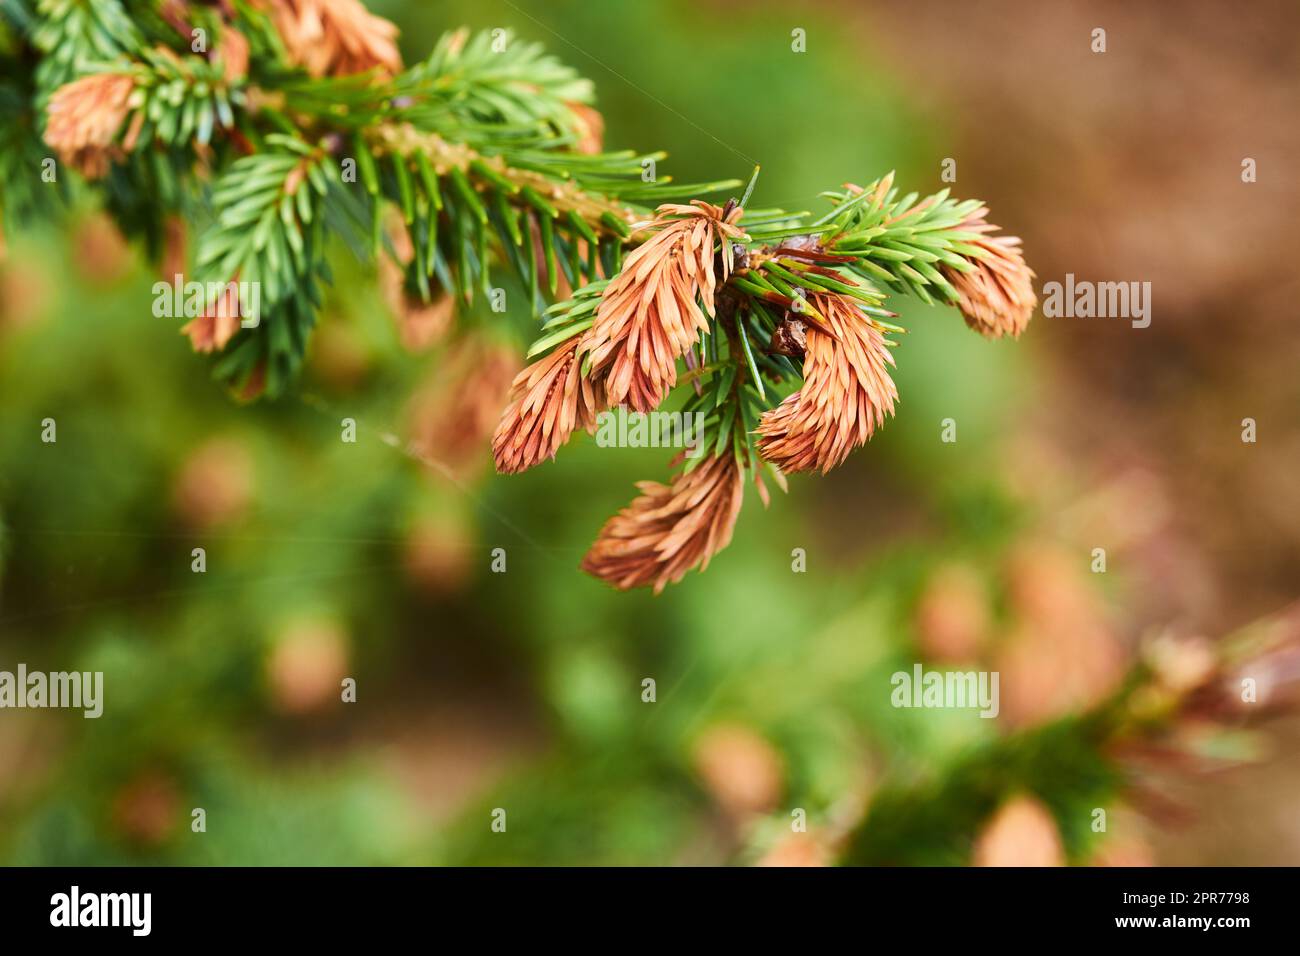 Closeup of Sitka spruce growing in a quiet, zen pine forest with a blurry background and copyspace. Zoom in on details and patterns of pine needles on a branch, soothing peaceful harmony nature Stock Photo